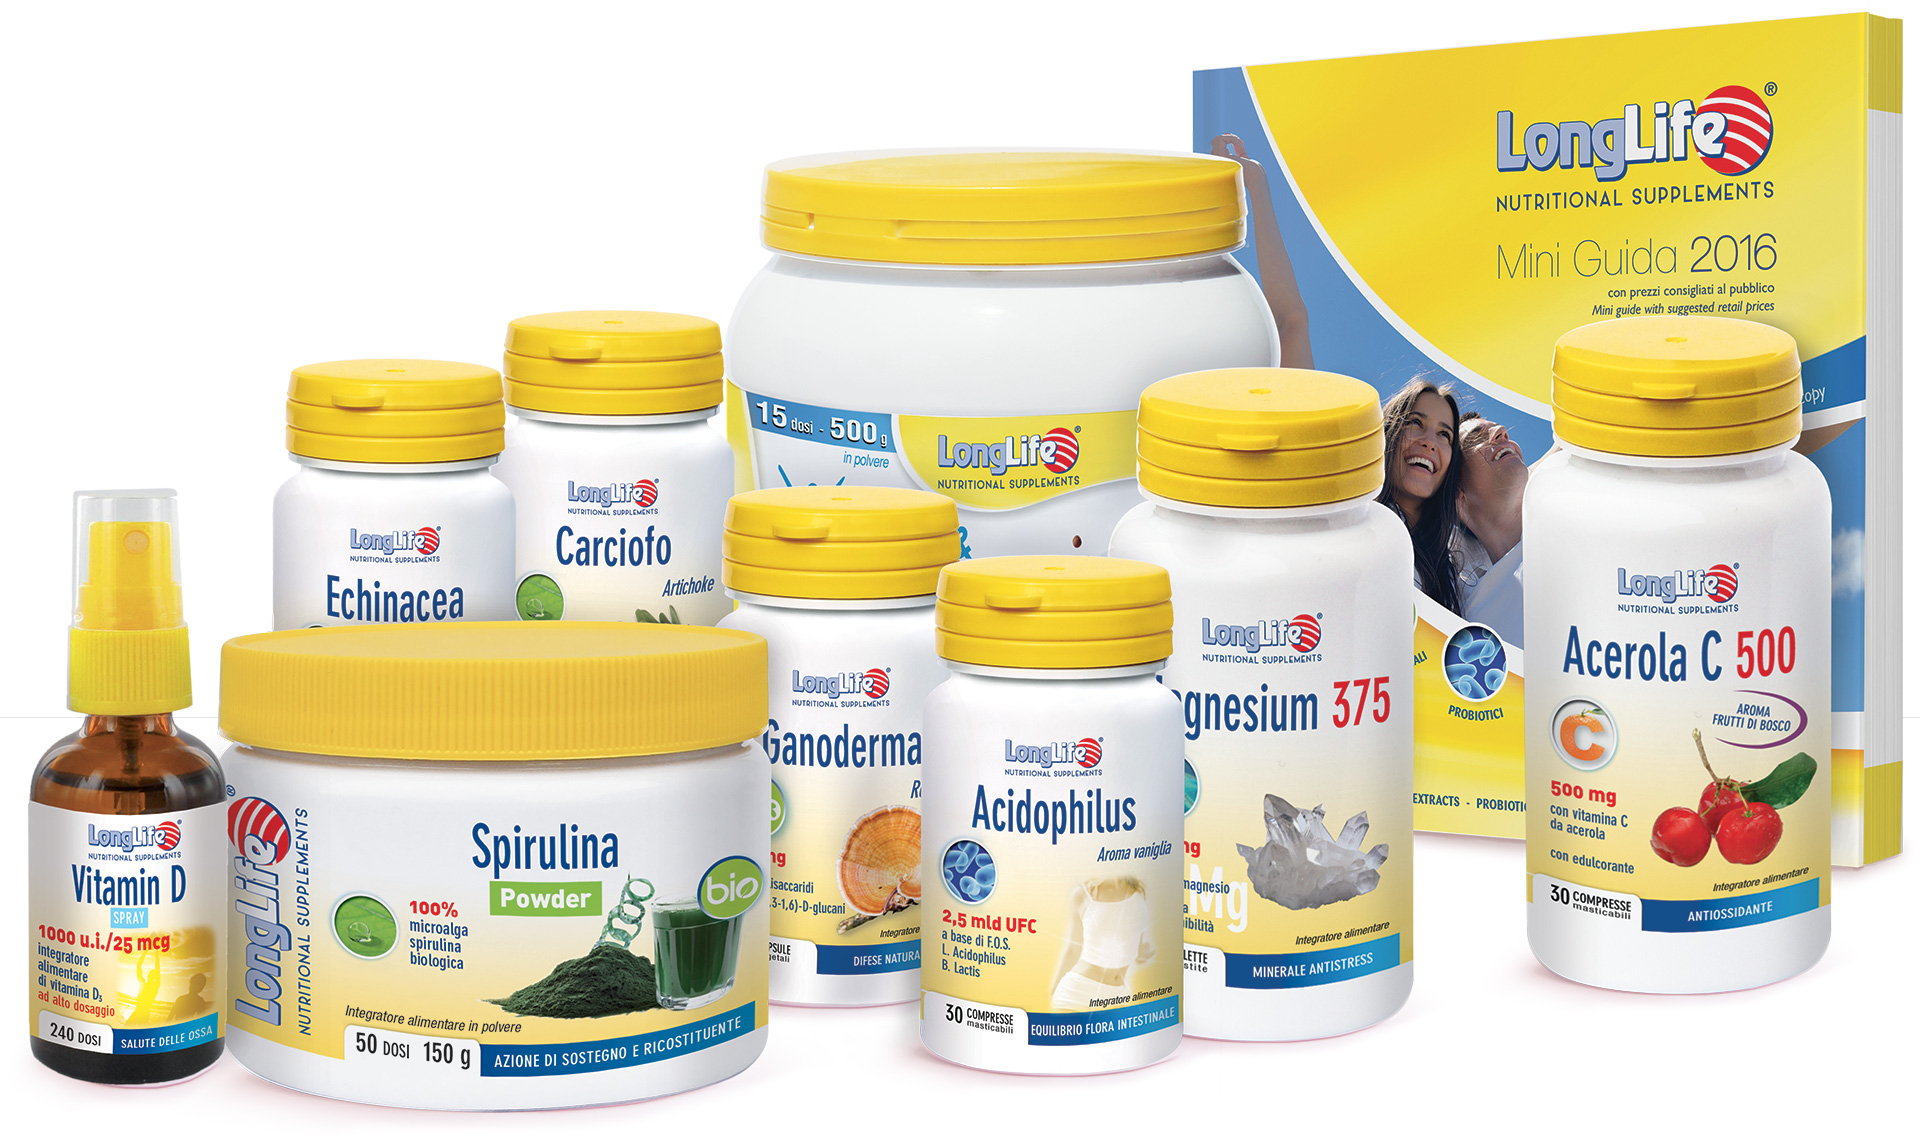 LongLife Nutritional Supplements